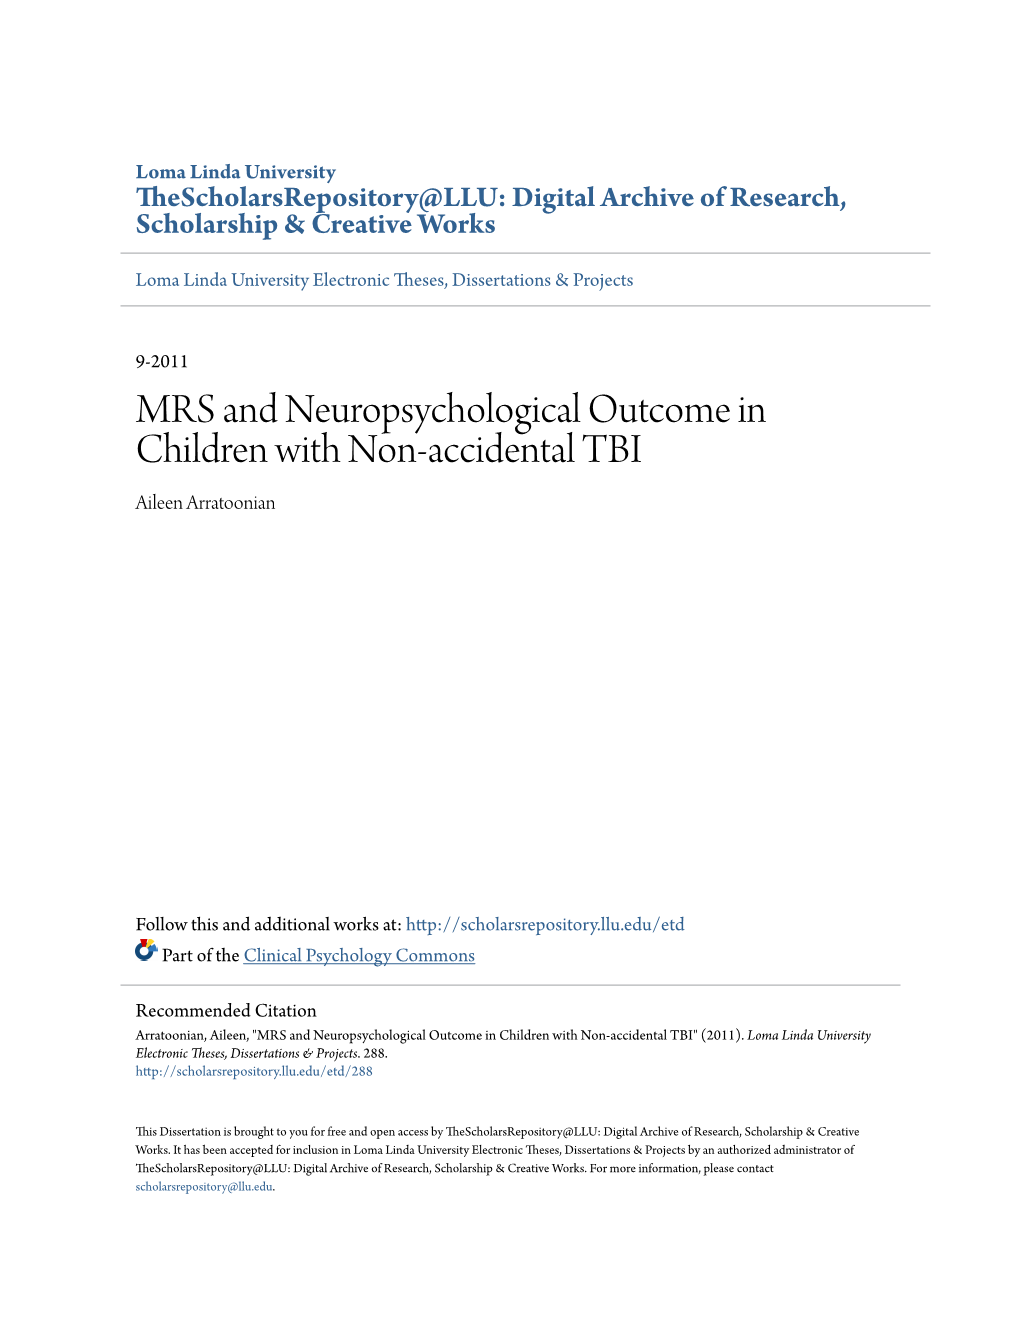 MRS and Neuropsychological Outcome in Children with Non-Accidental TBI Aileen Arratoonian